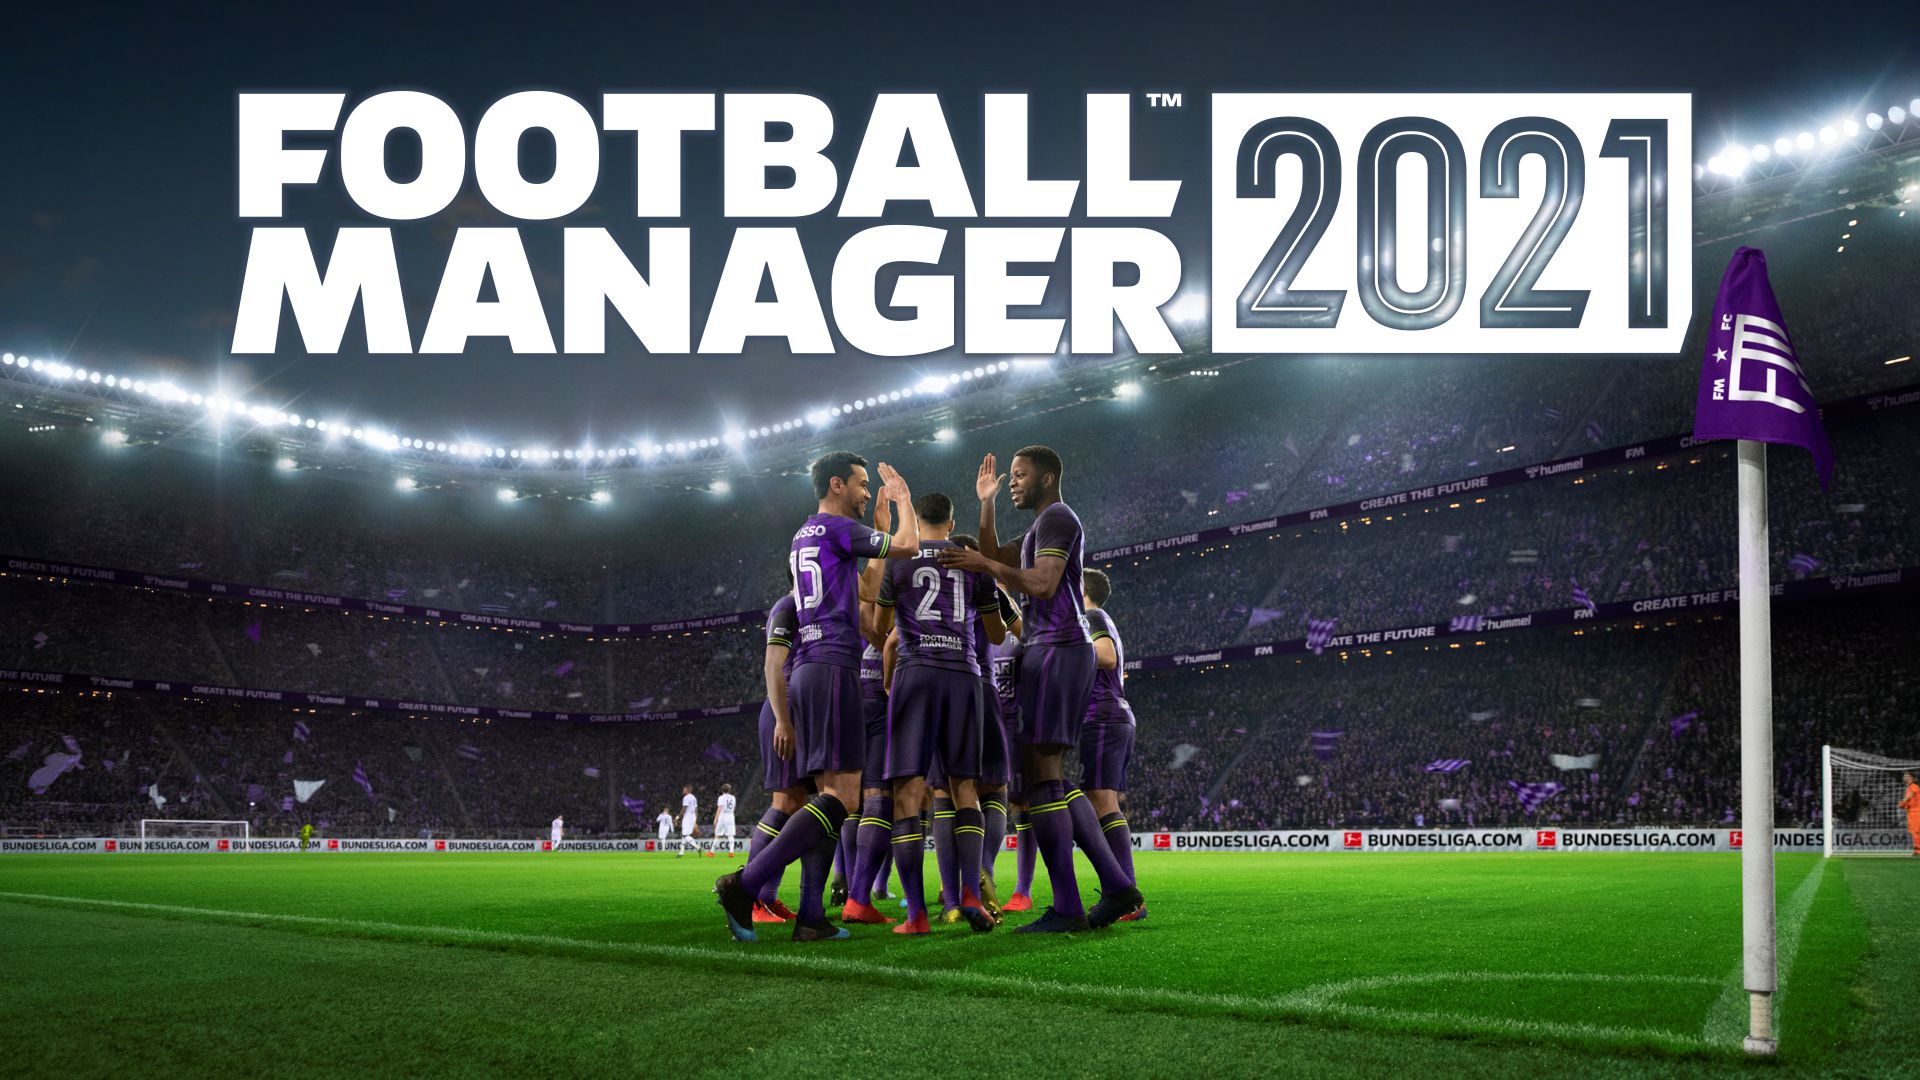 Football Manager 2021 İnceleme